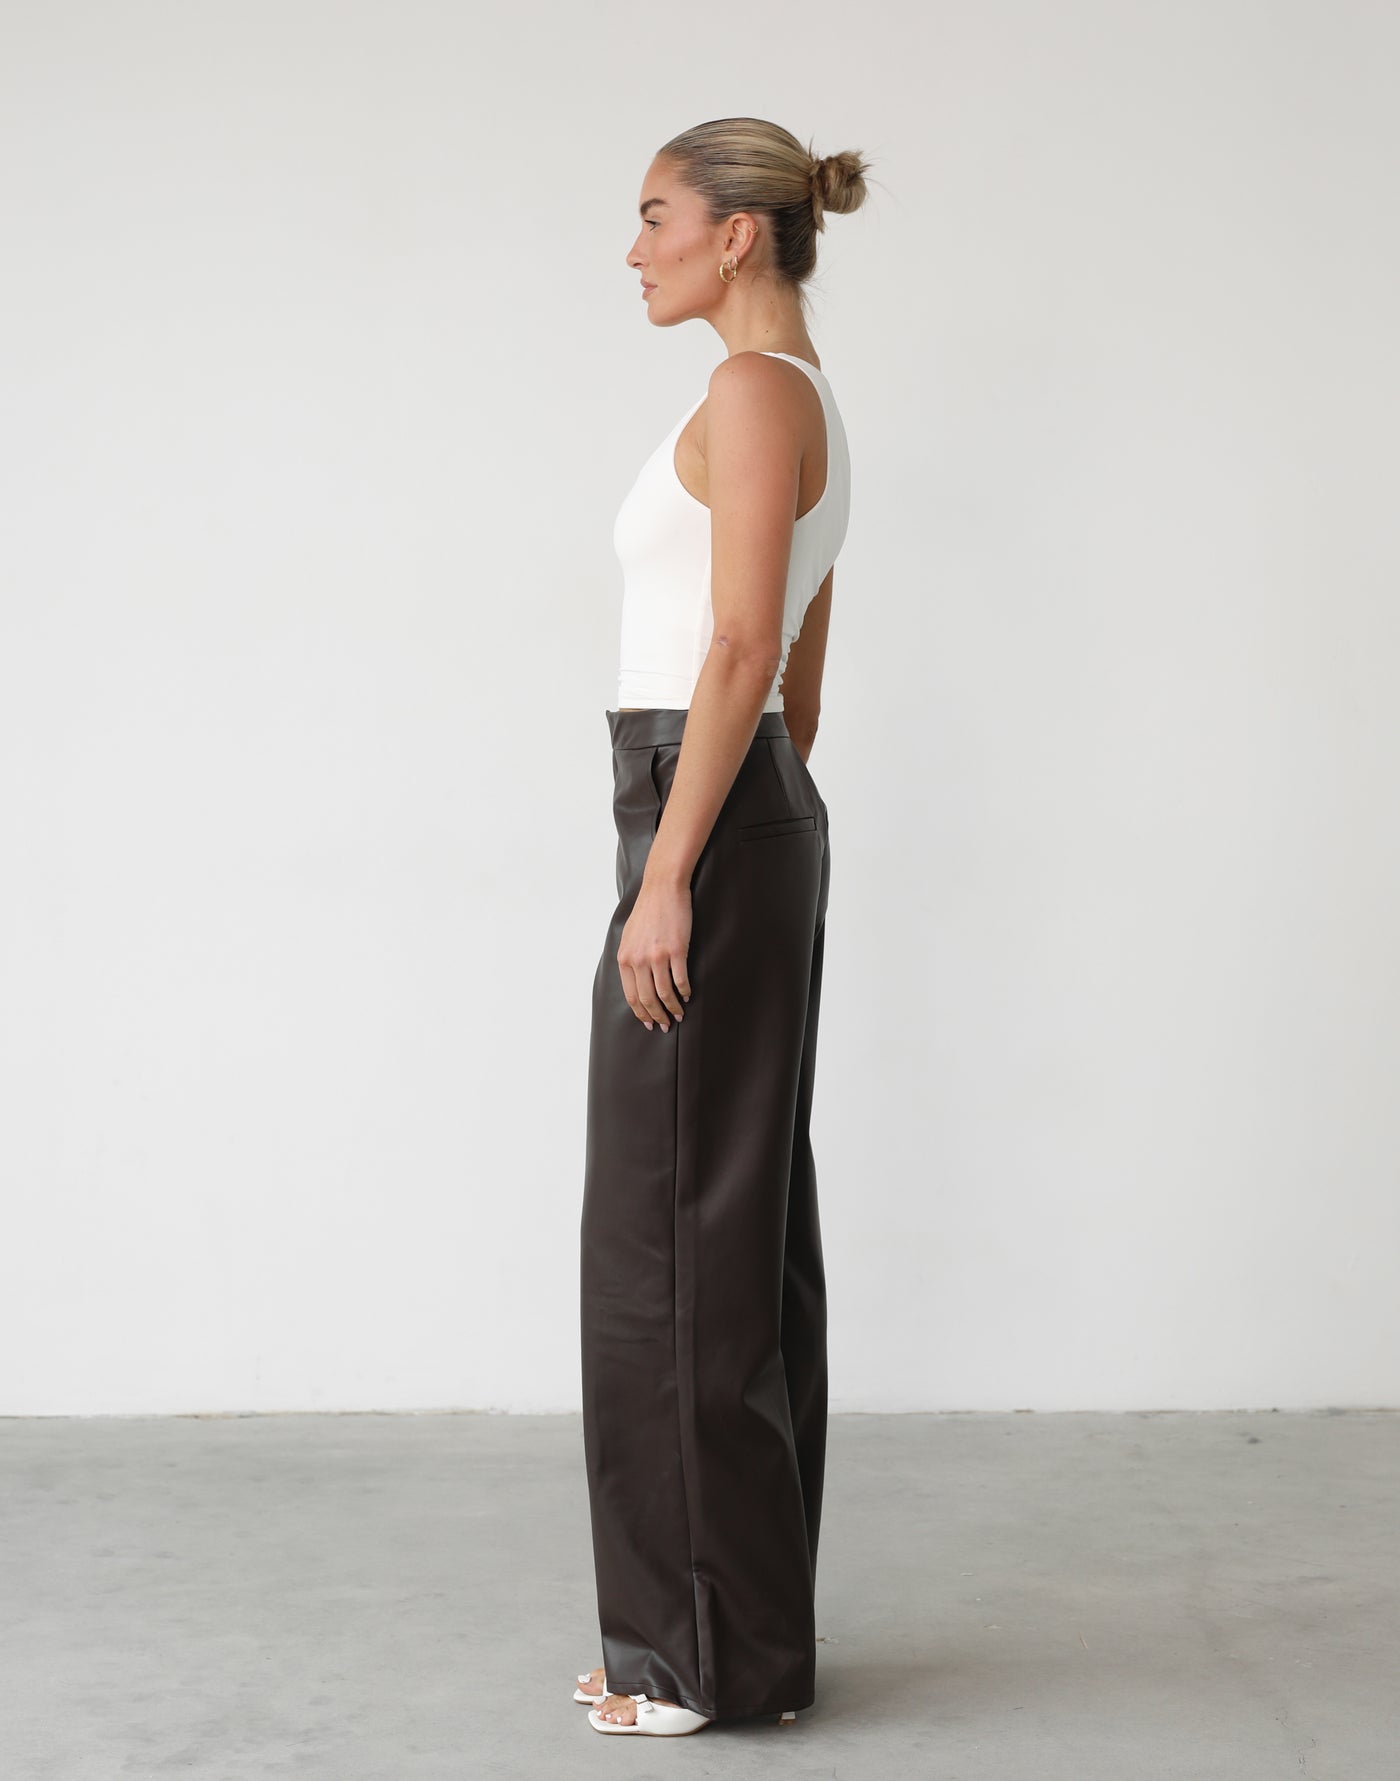 Raven Pants (Chocolate) - Brown Faux Leather High Waisted Pants - Women's Pants - Charcoal Clothing